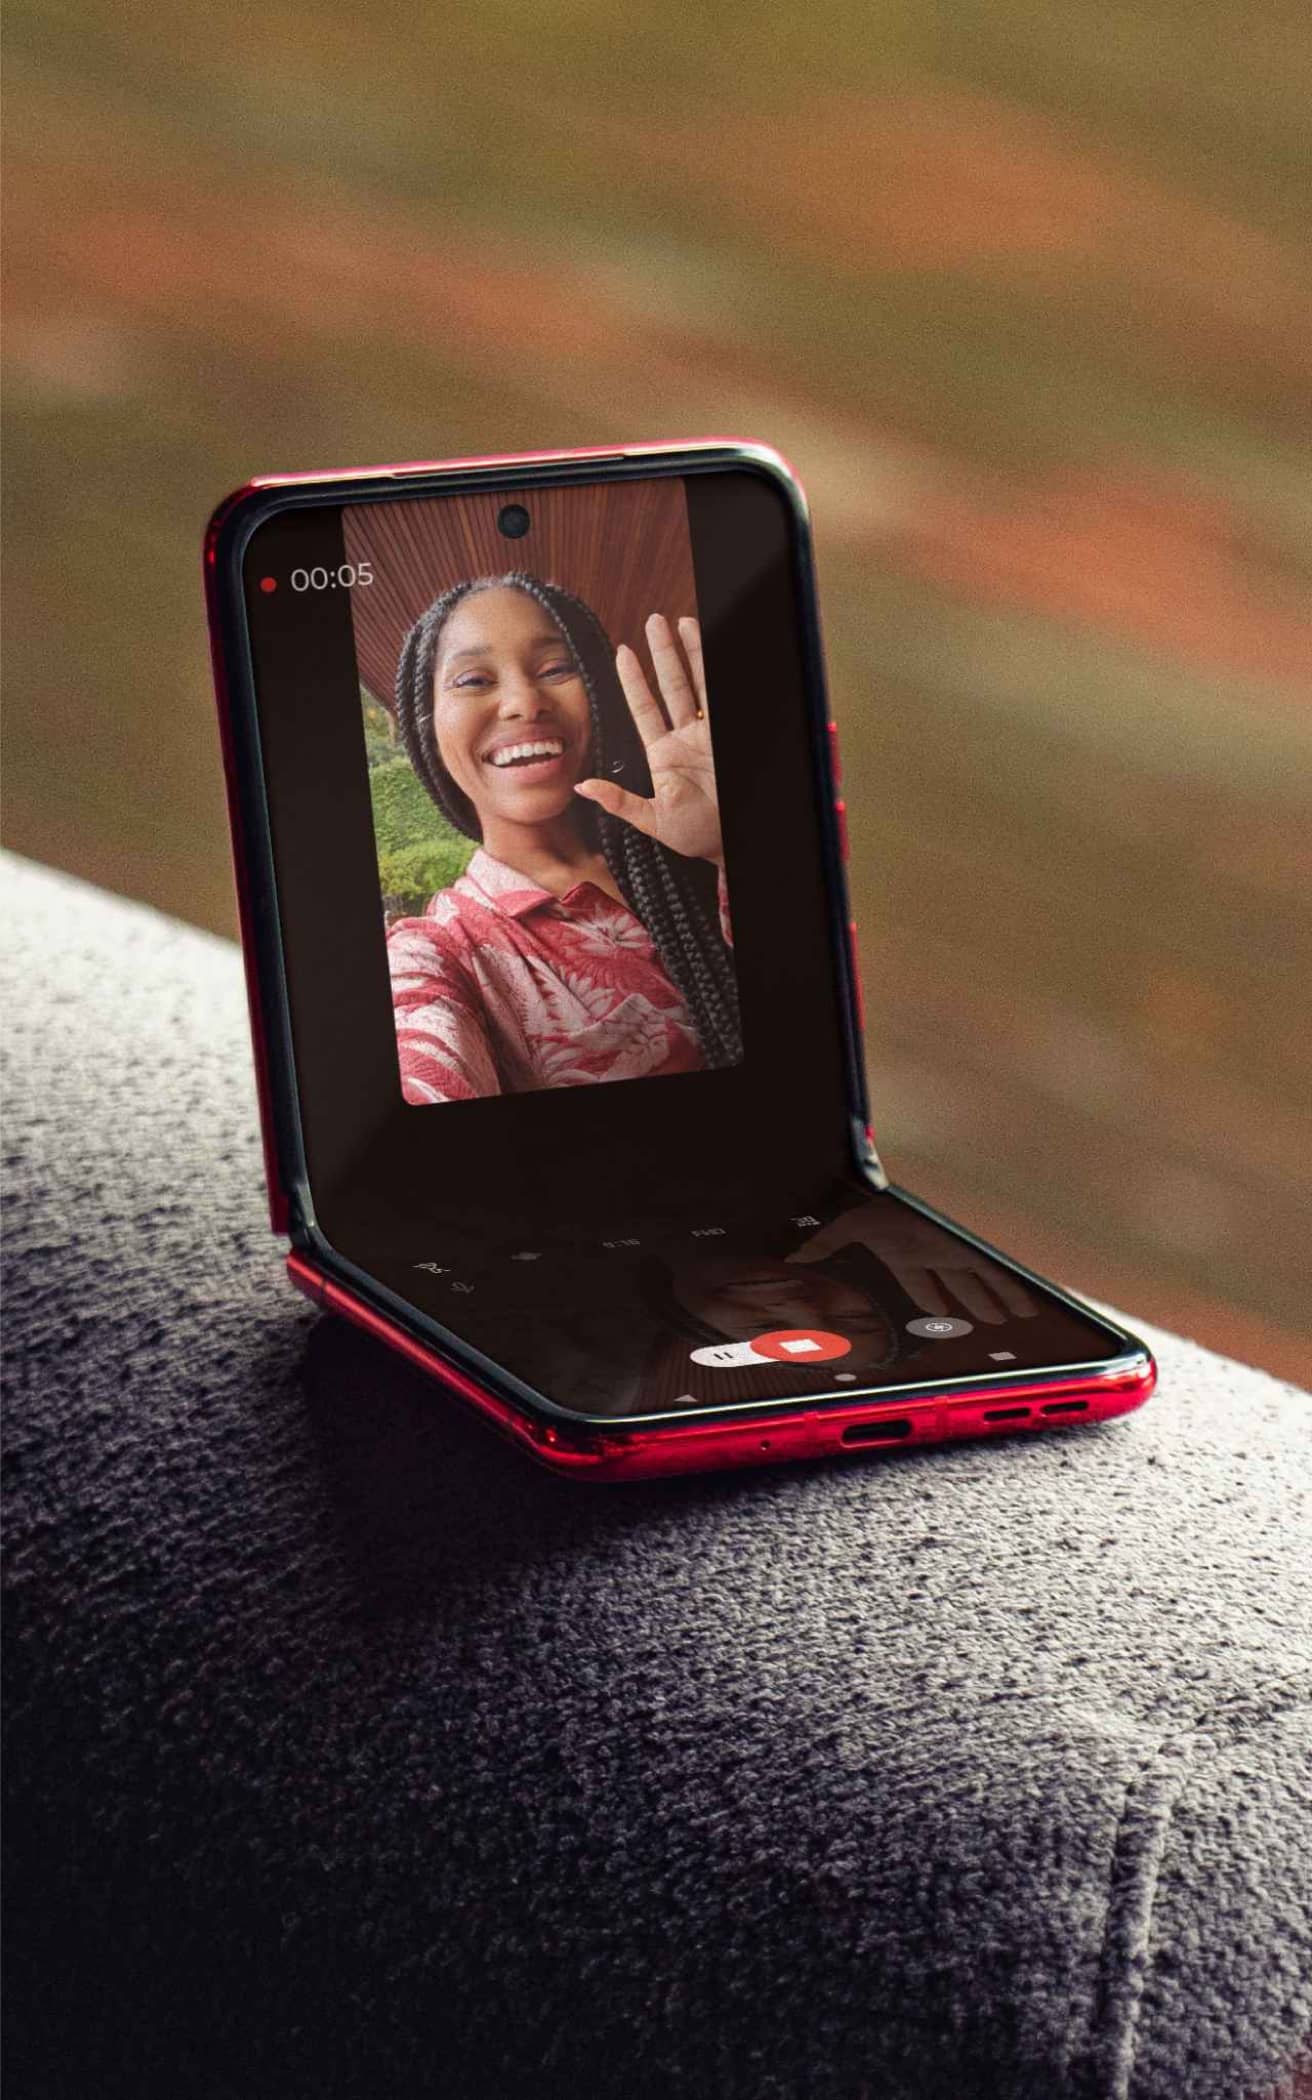 A motorola razr 40 ultra is flipped open to 90 degrees and rests on the arm of a chair. A video call is depicted on screen.